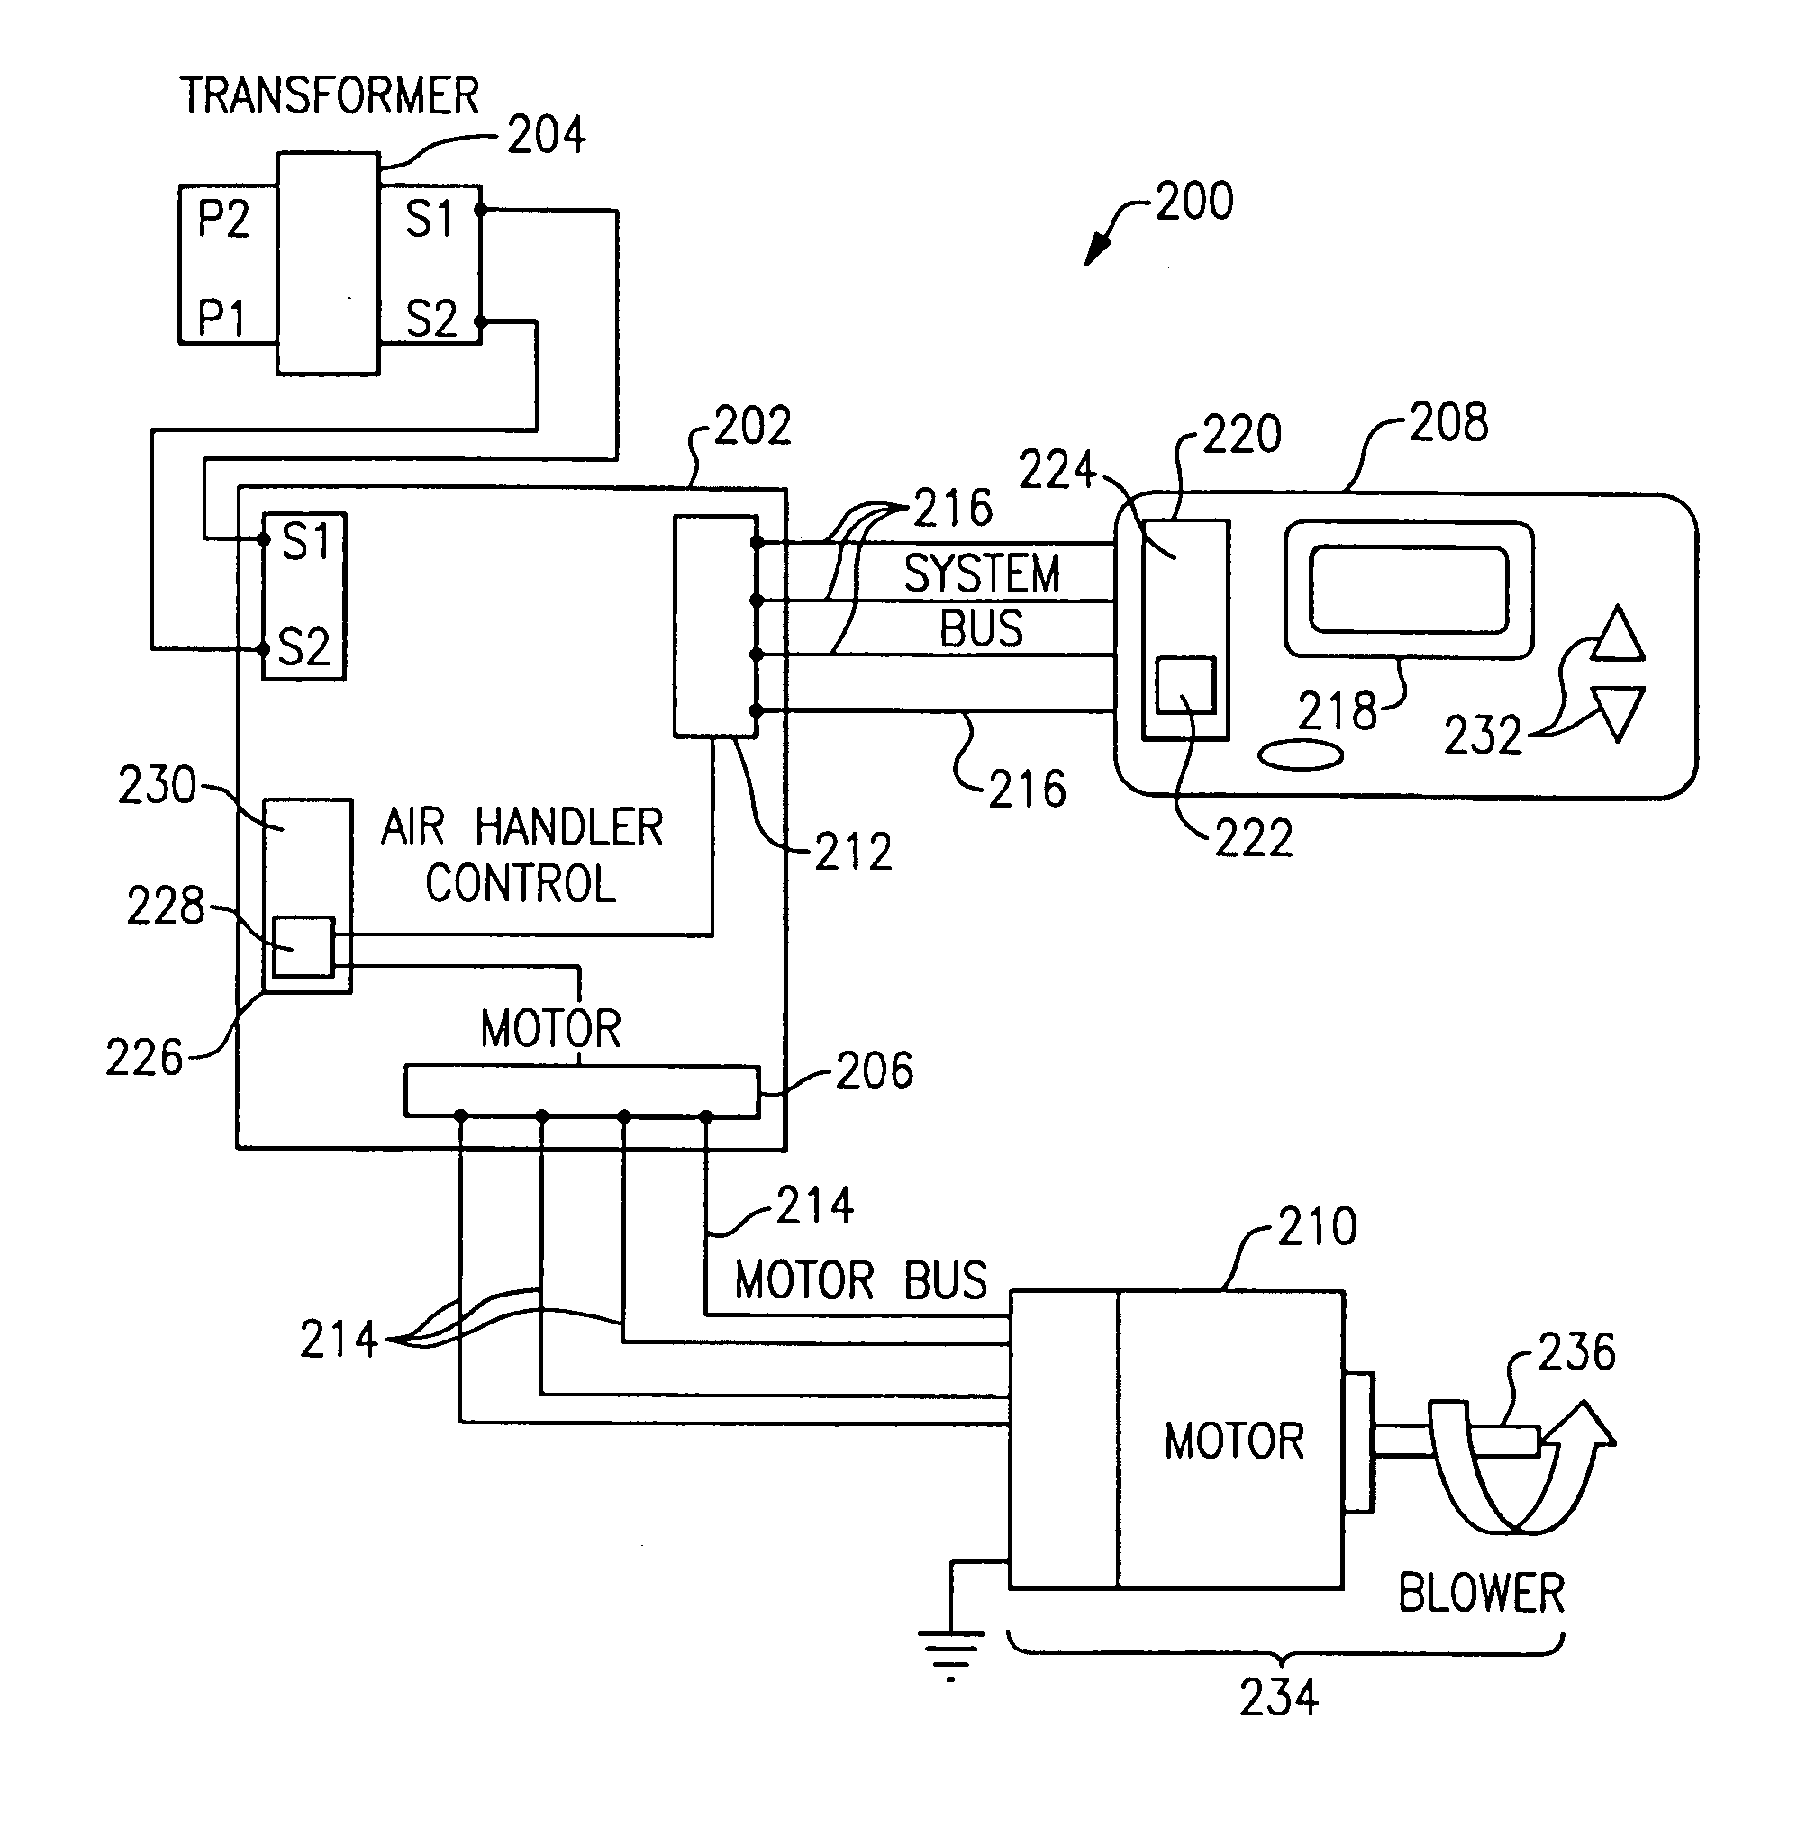 Method of determining static pressure in a ducted air delivery system using a variable speed blower motor